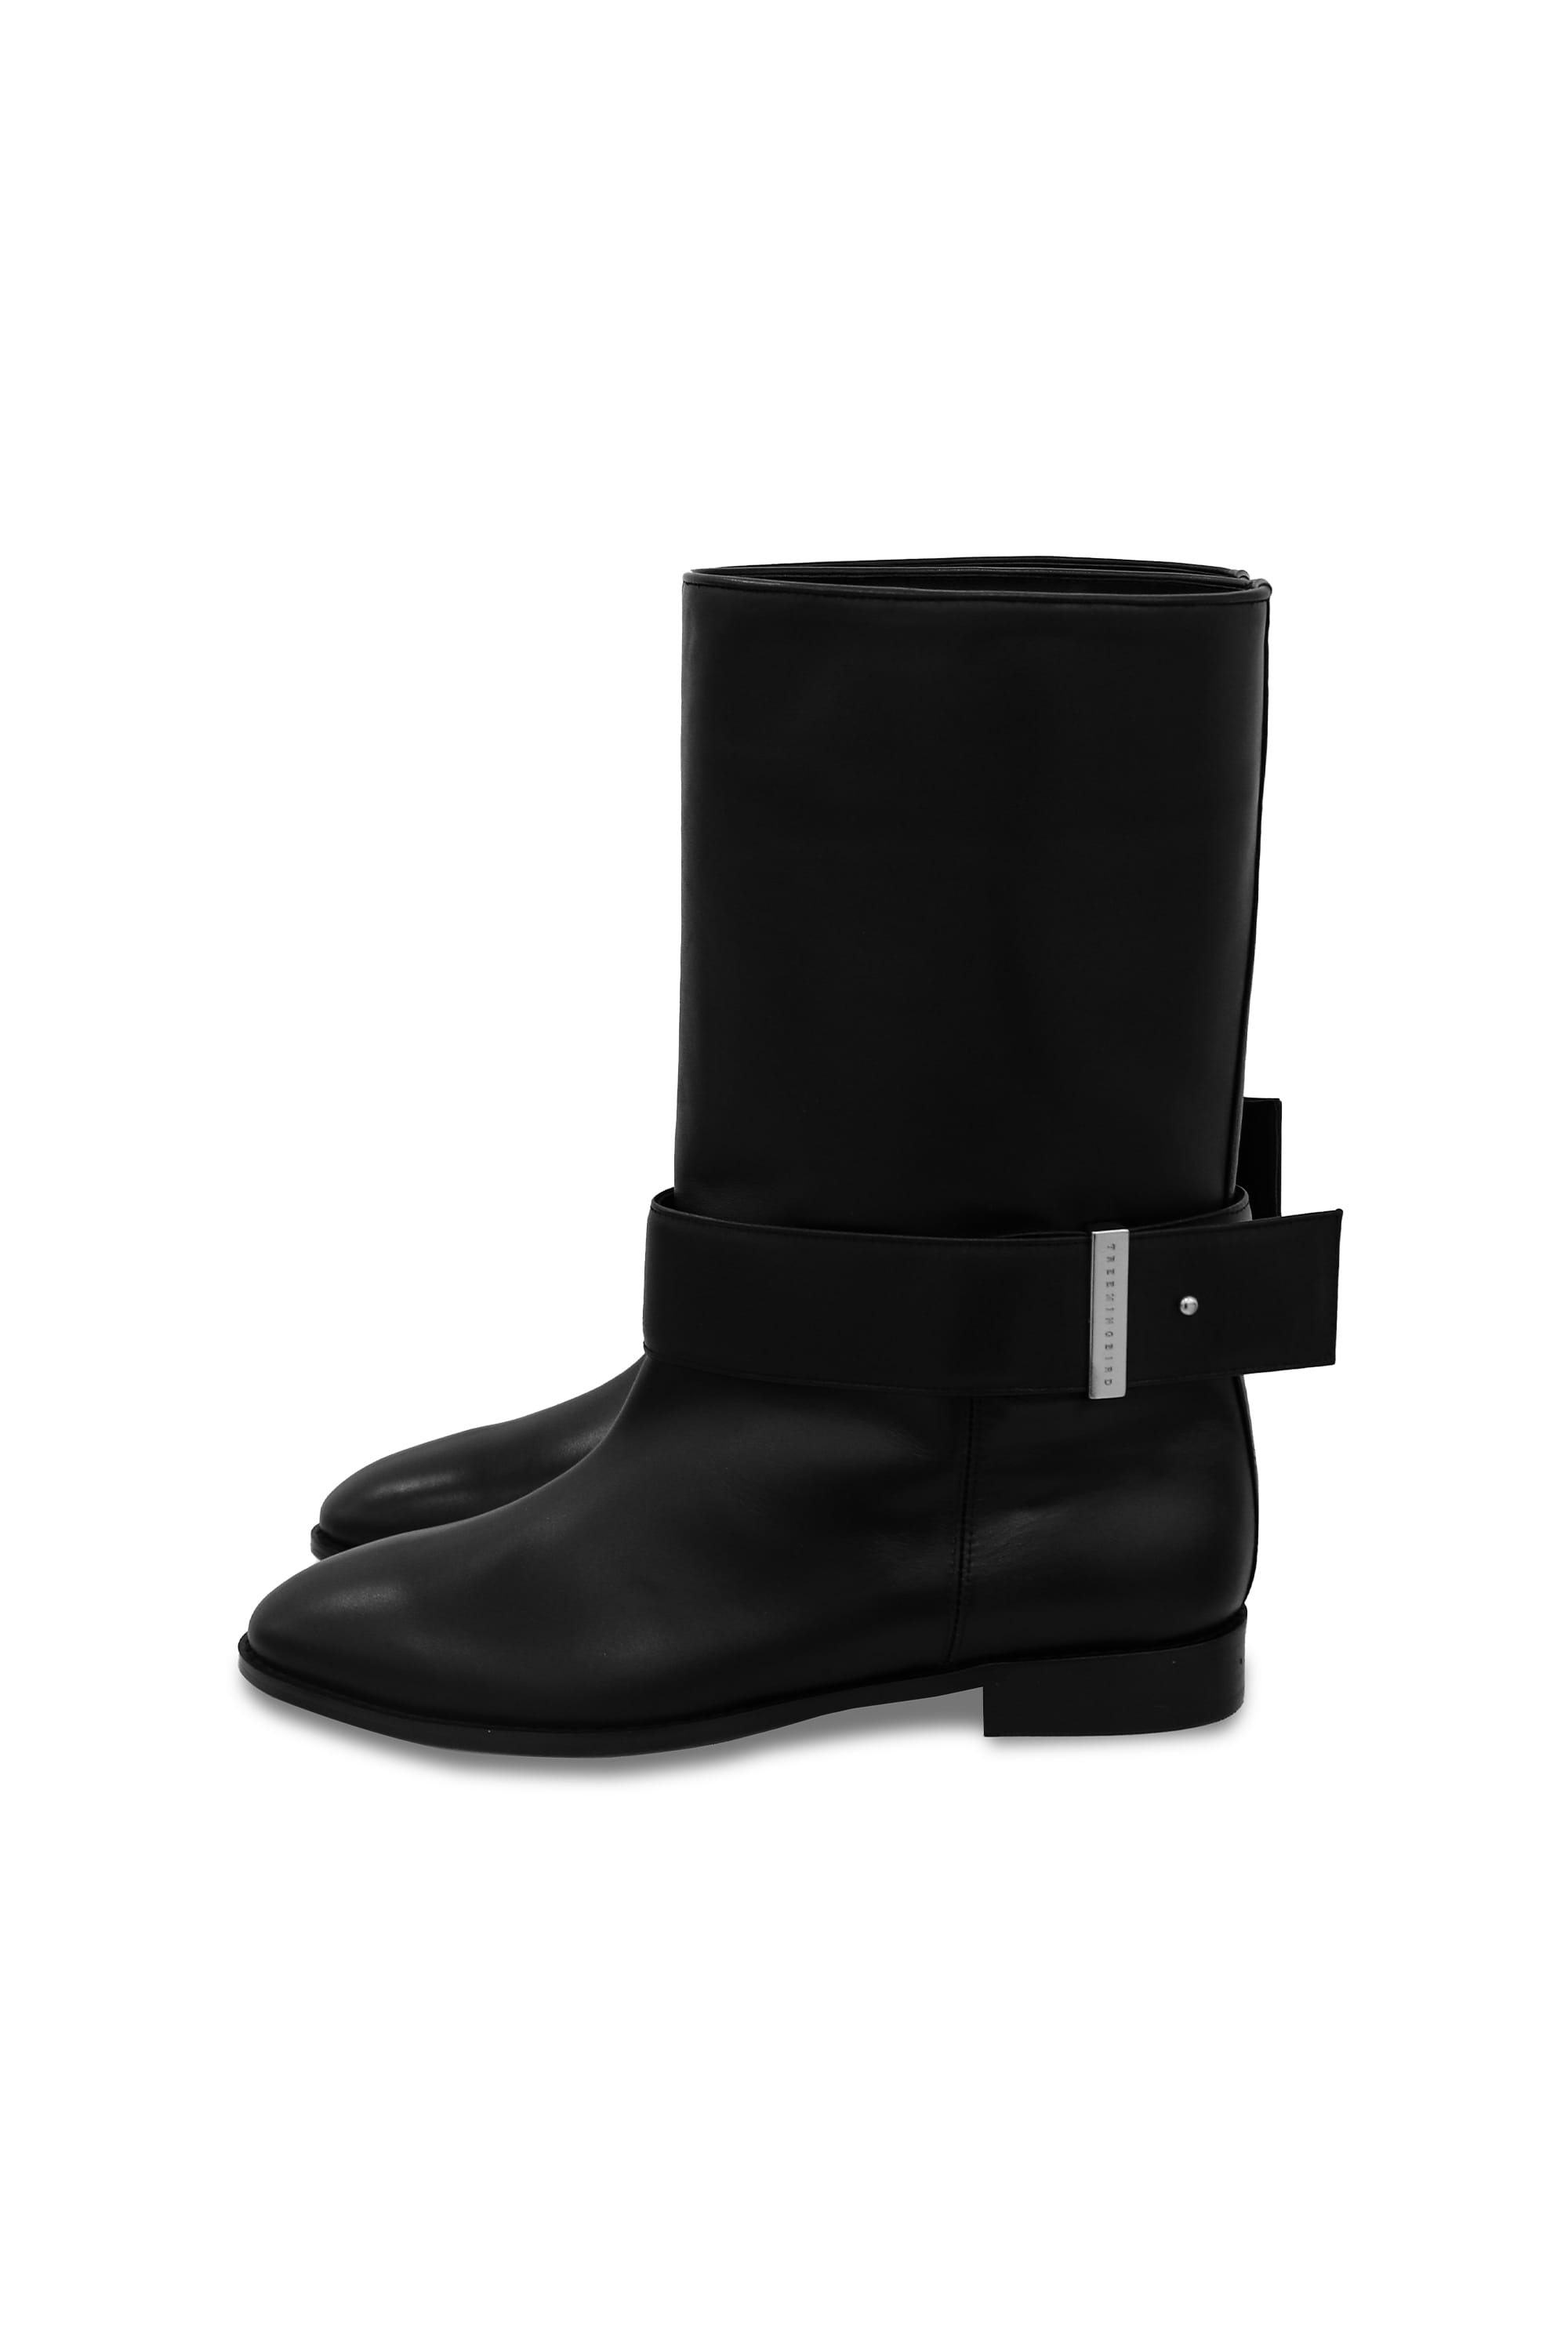 HANDMADE) Cowhide Belted Middle Boots [ Black ]